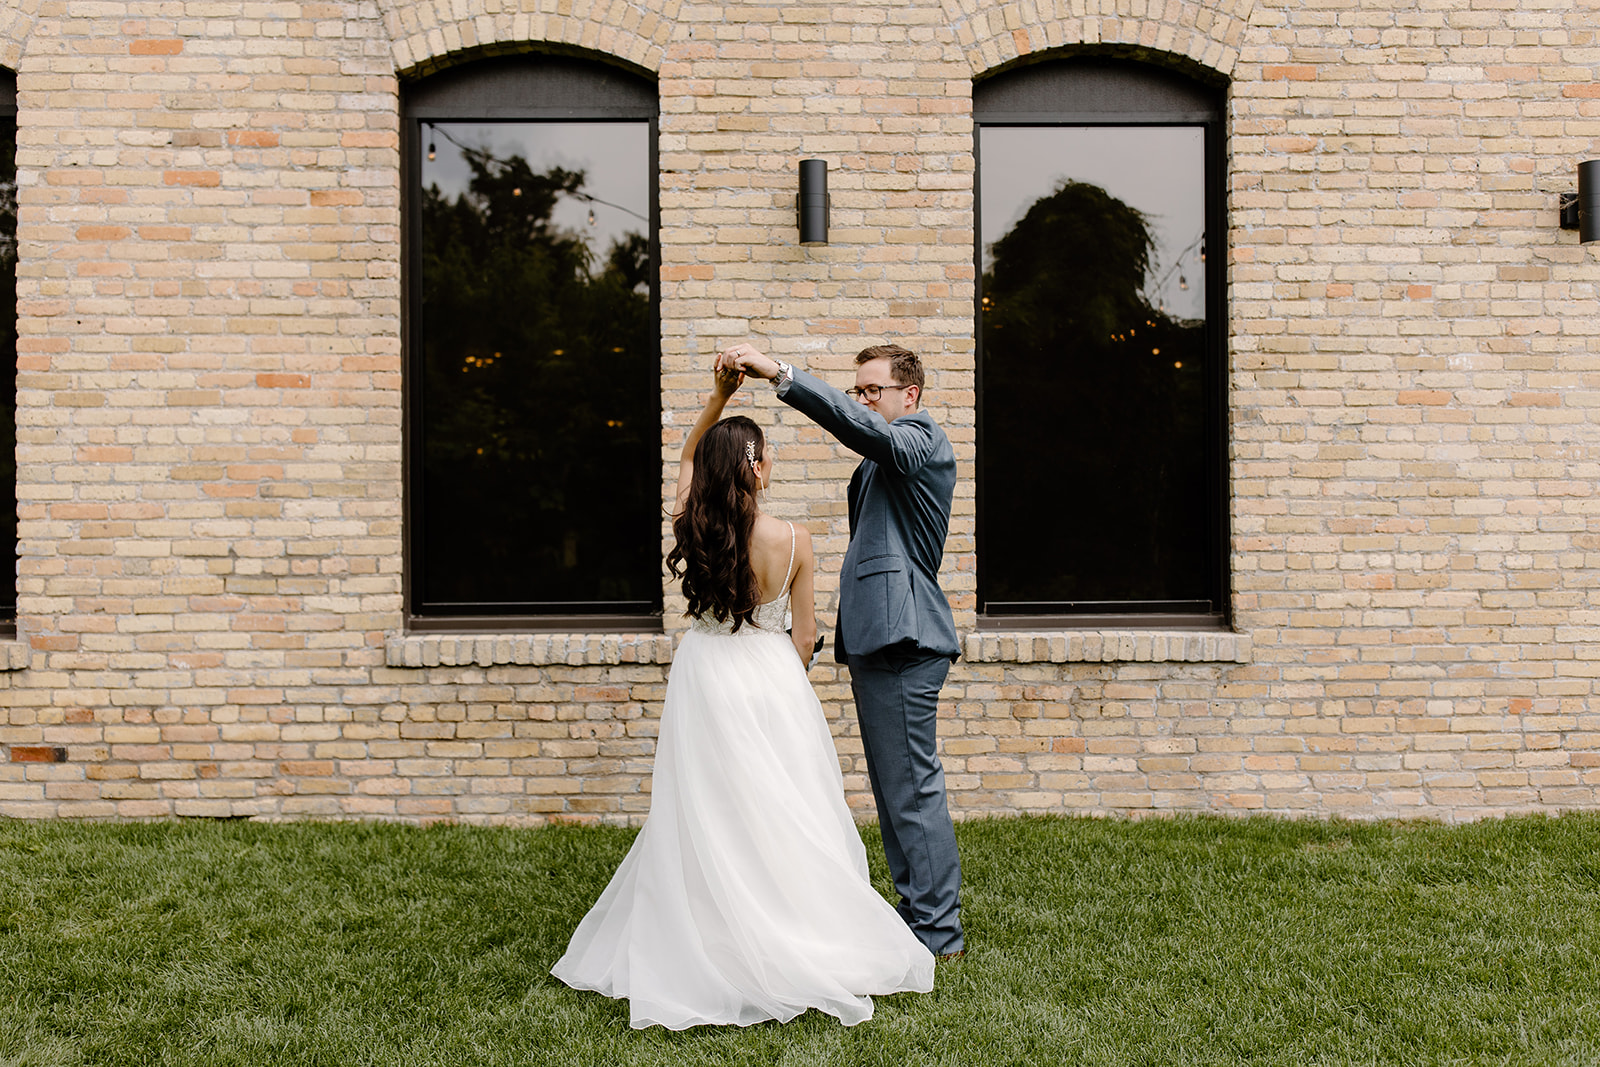 Groom twirls his bride in front of a brick wall with black windows